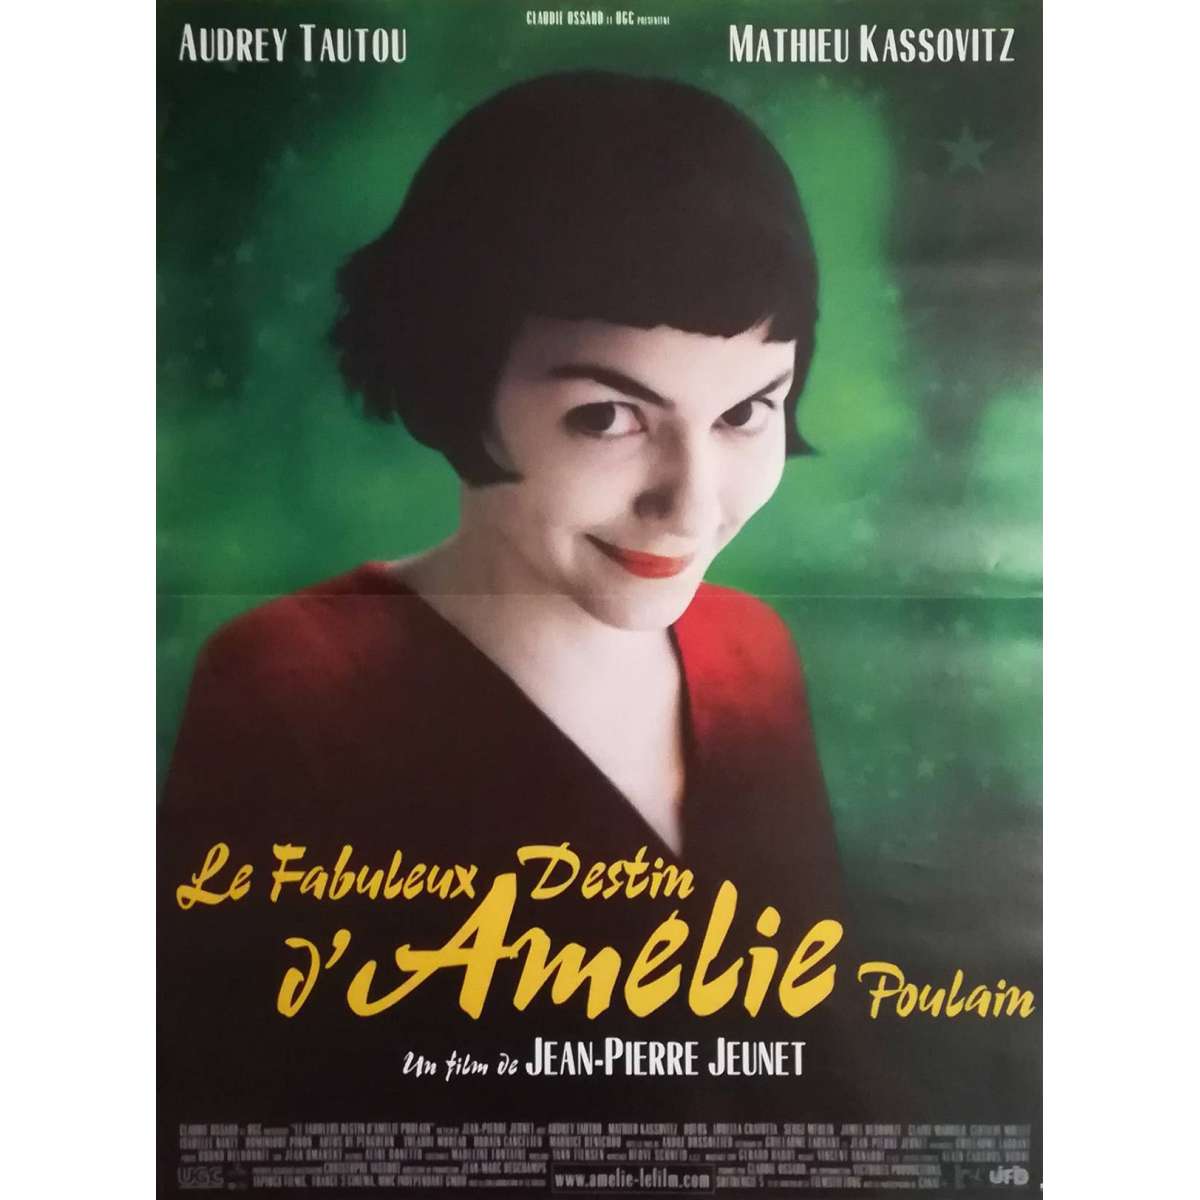 AMELIE Movie Poster 15x21 in.